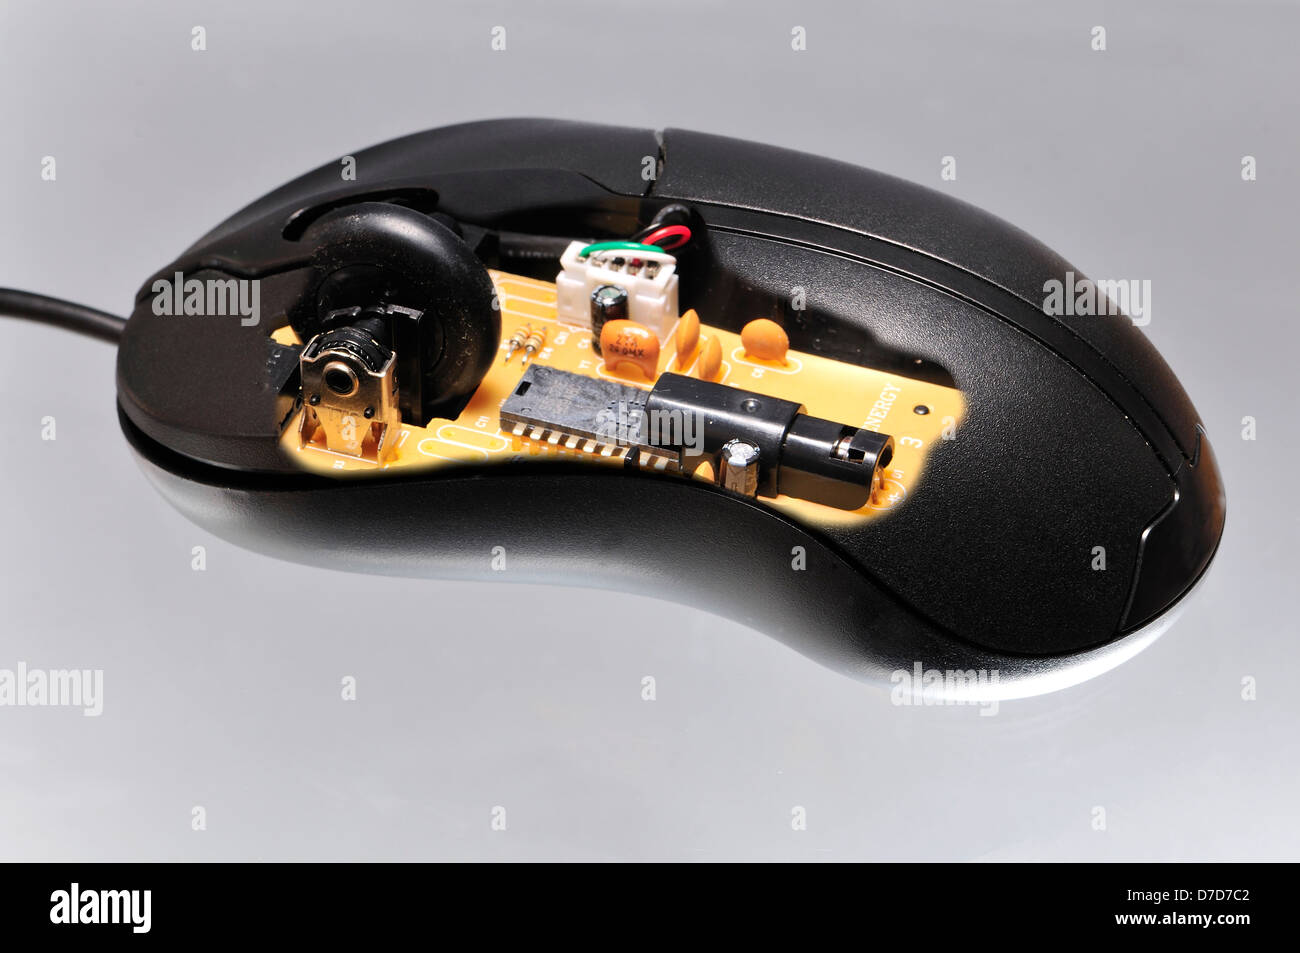 Computer mouse - inside Stock Photo